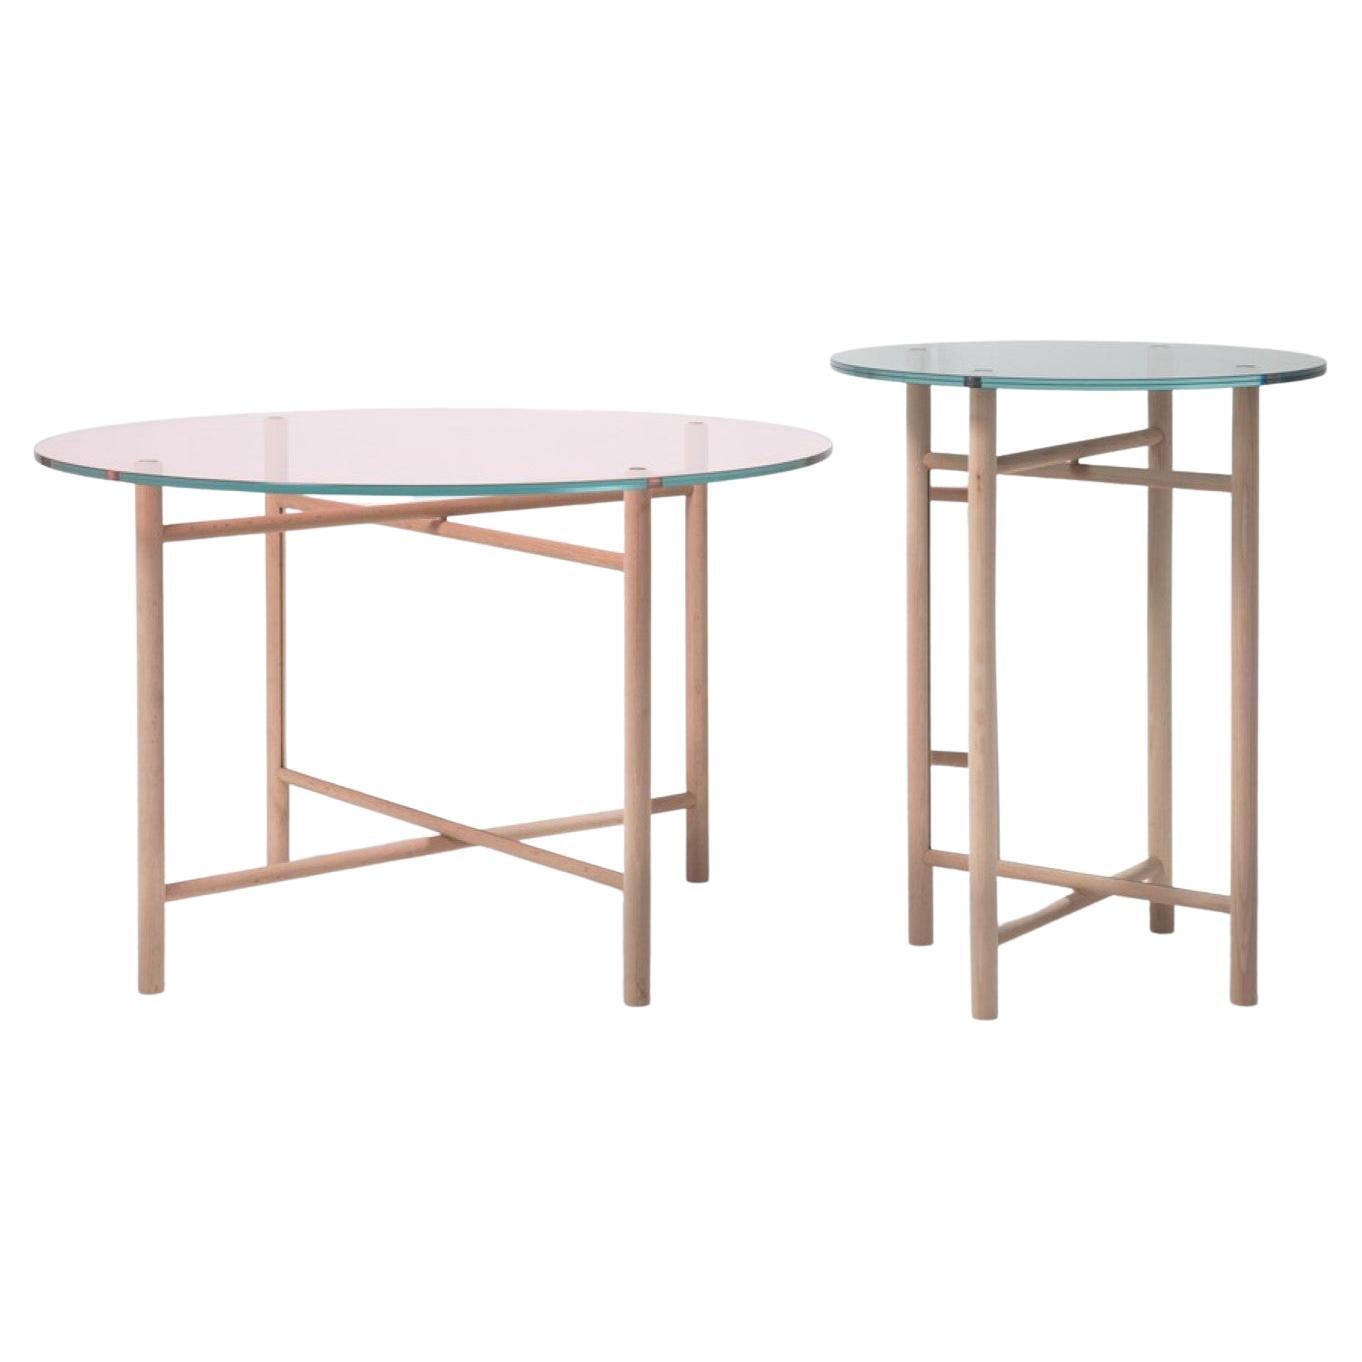 Set of Elias and Son Tables by Llot Llov